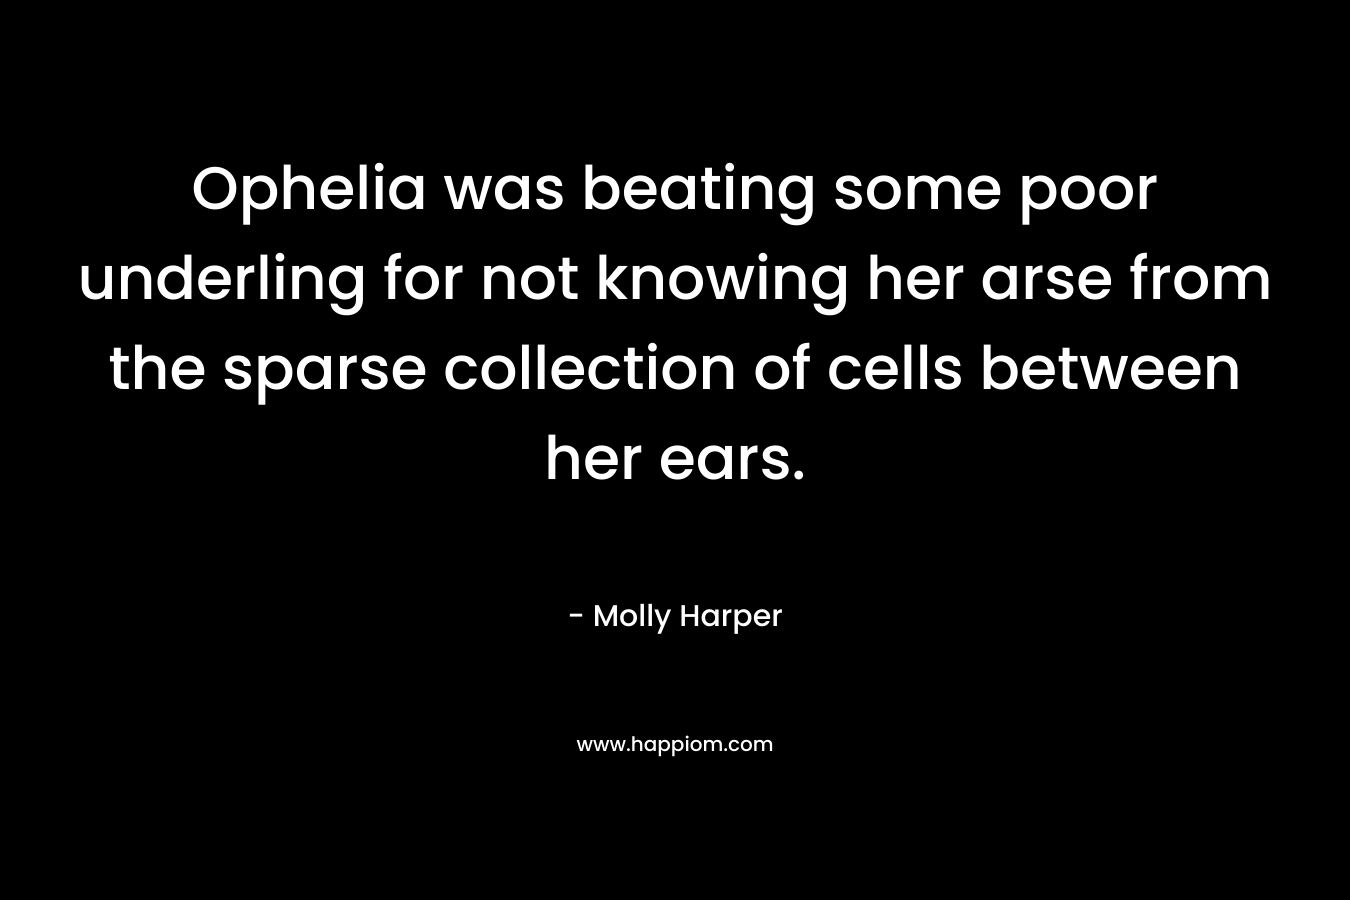 Ophelia was beating some poor underling for not knowing her arse from the sparse collection of cells between her ears. – Molly Harper